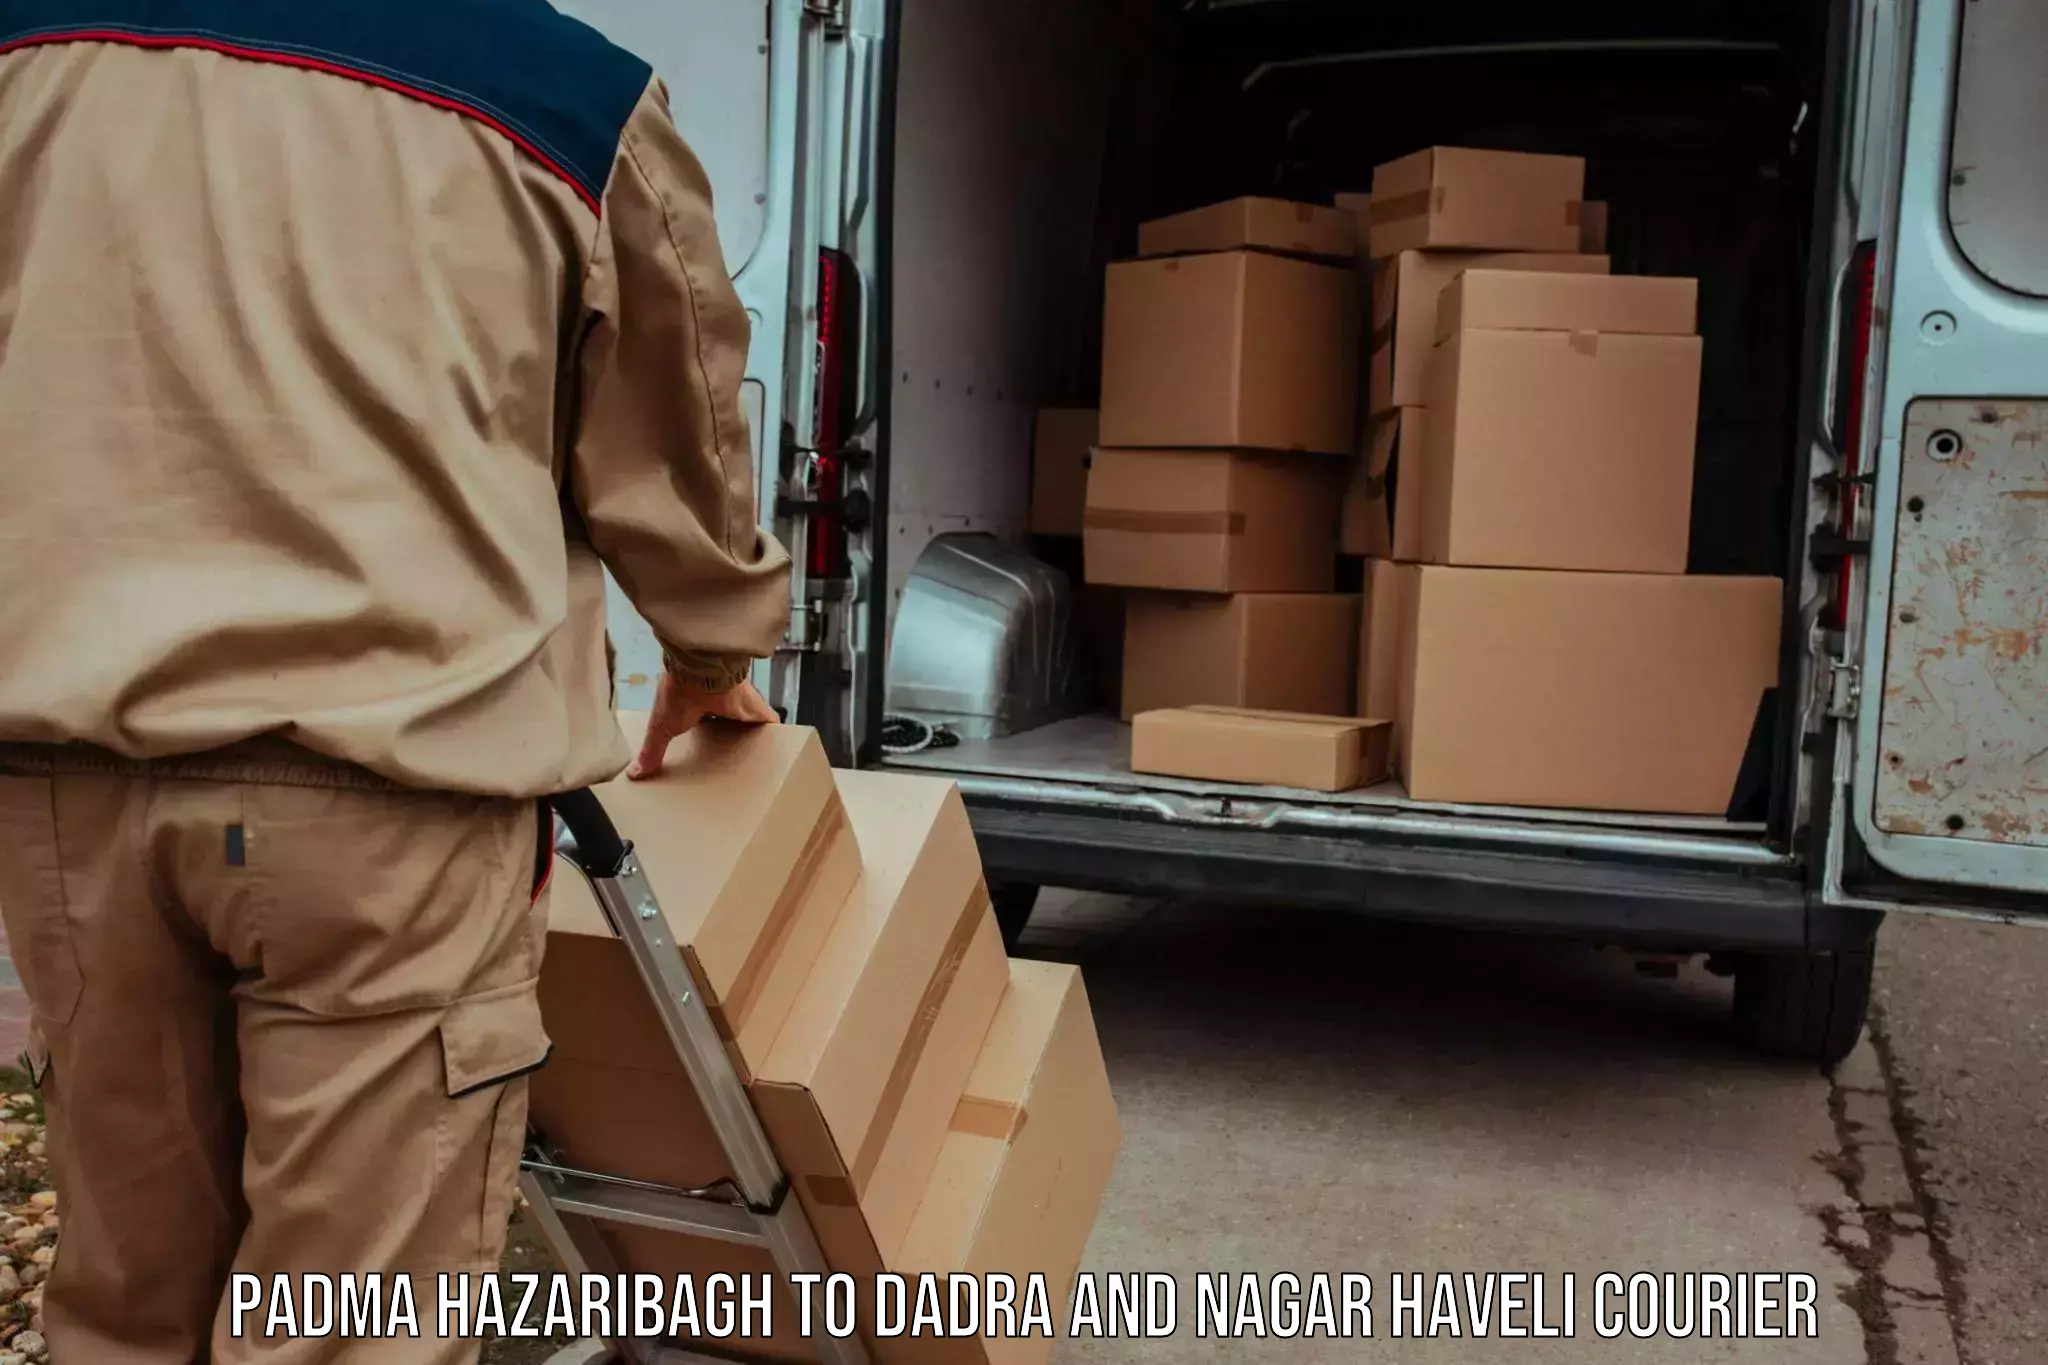 Professional parcel services in Padma Hazaribagh to Dadra and Nagar Haveli